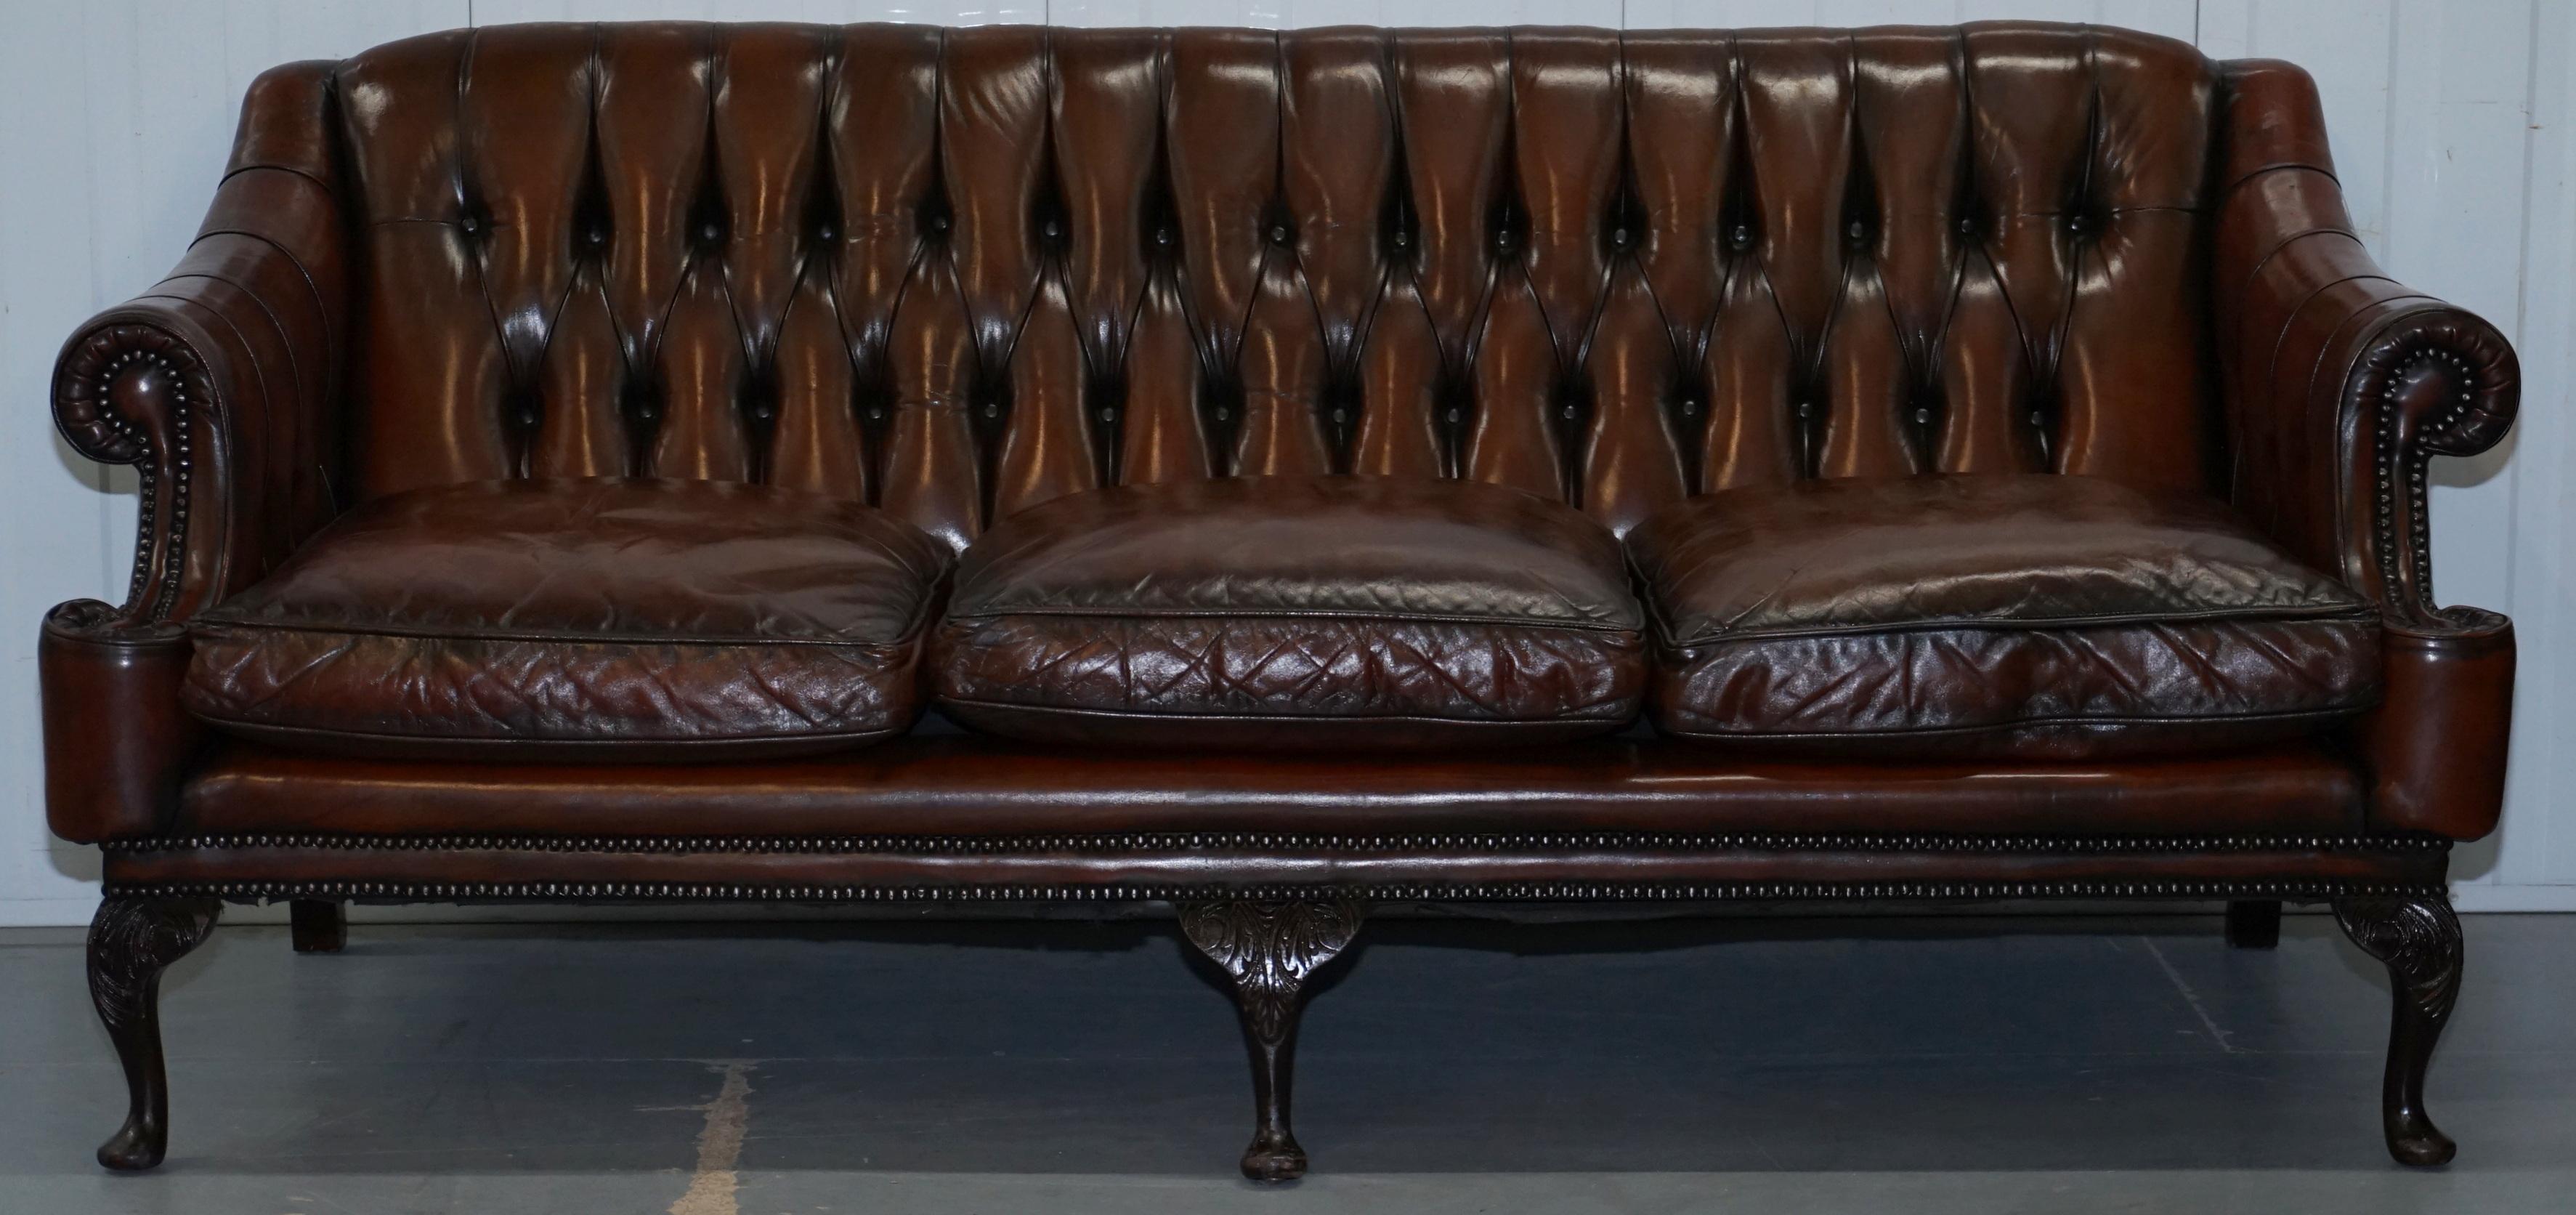 Pair of Restored Lutyen's Viceroy Chesterfield Brown Leather Hand Dyed Sofas 8